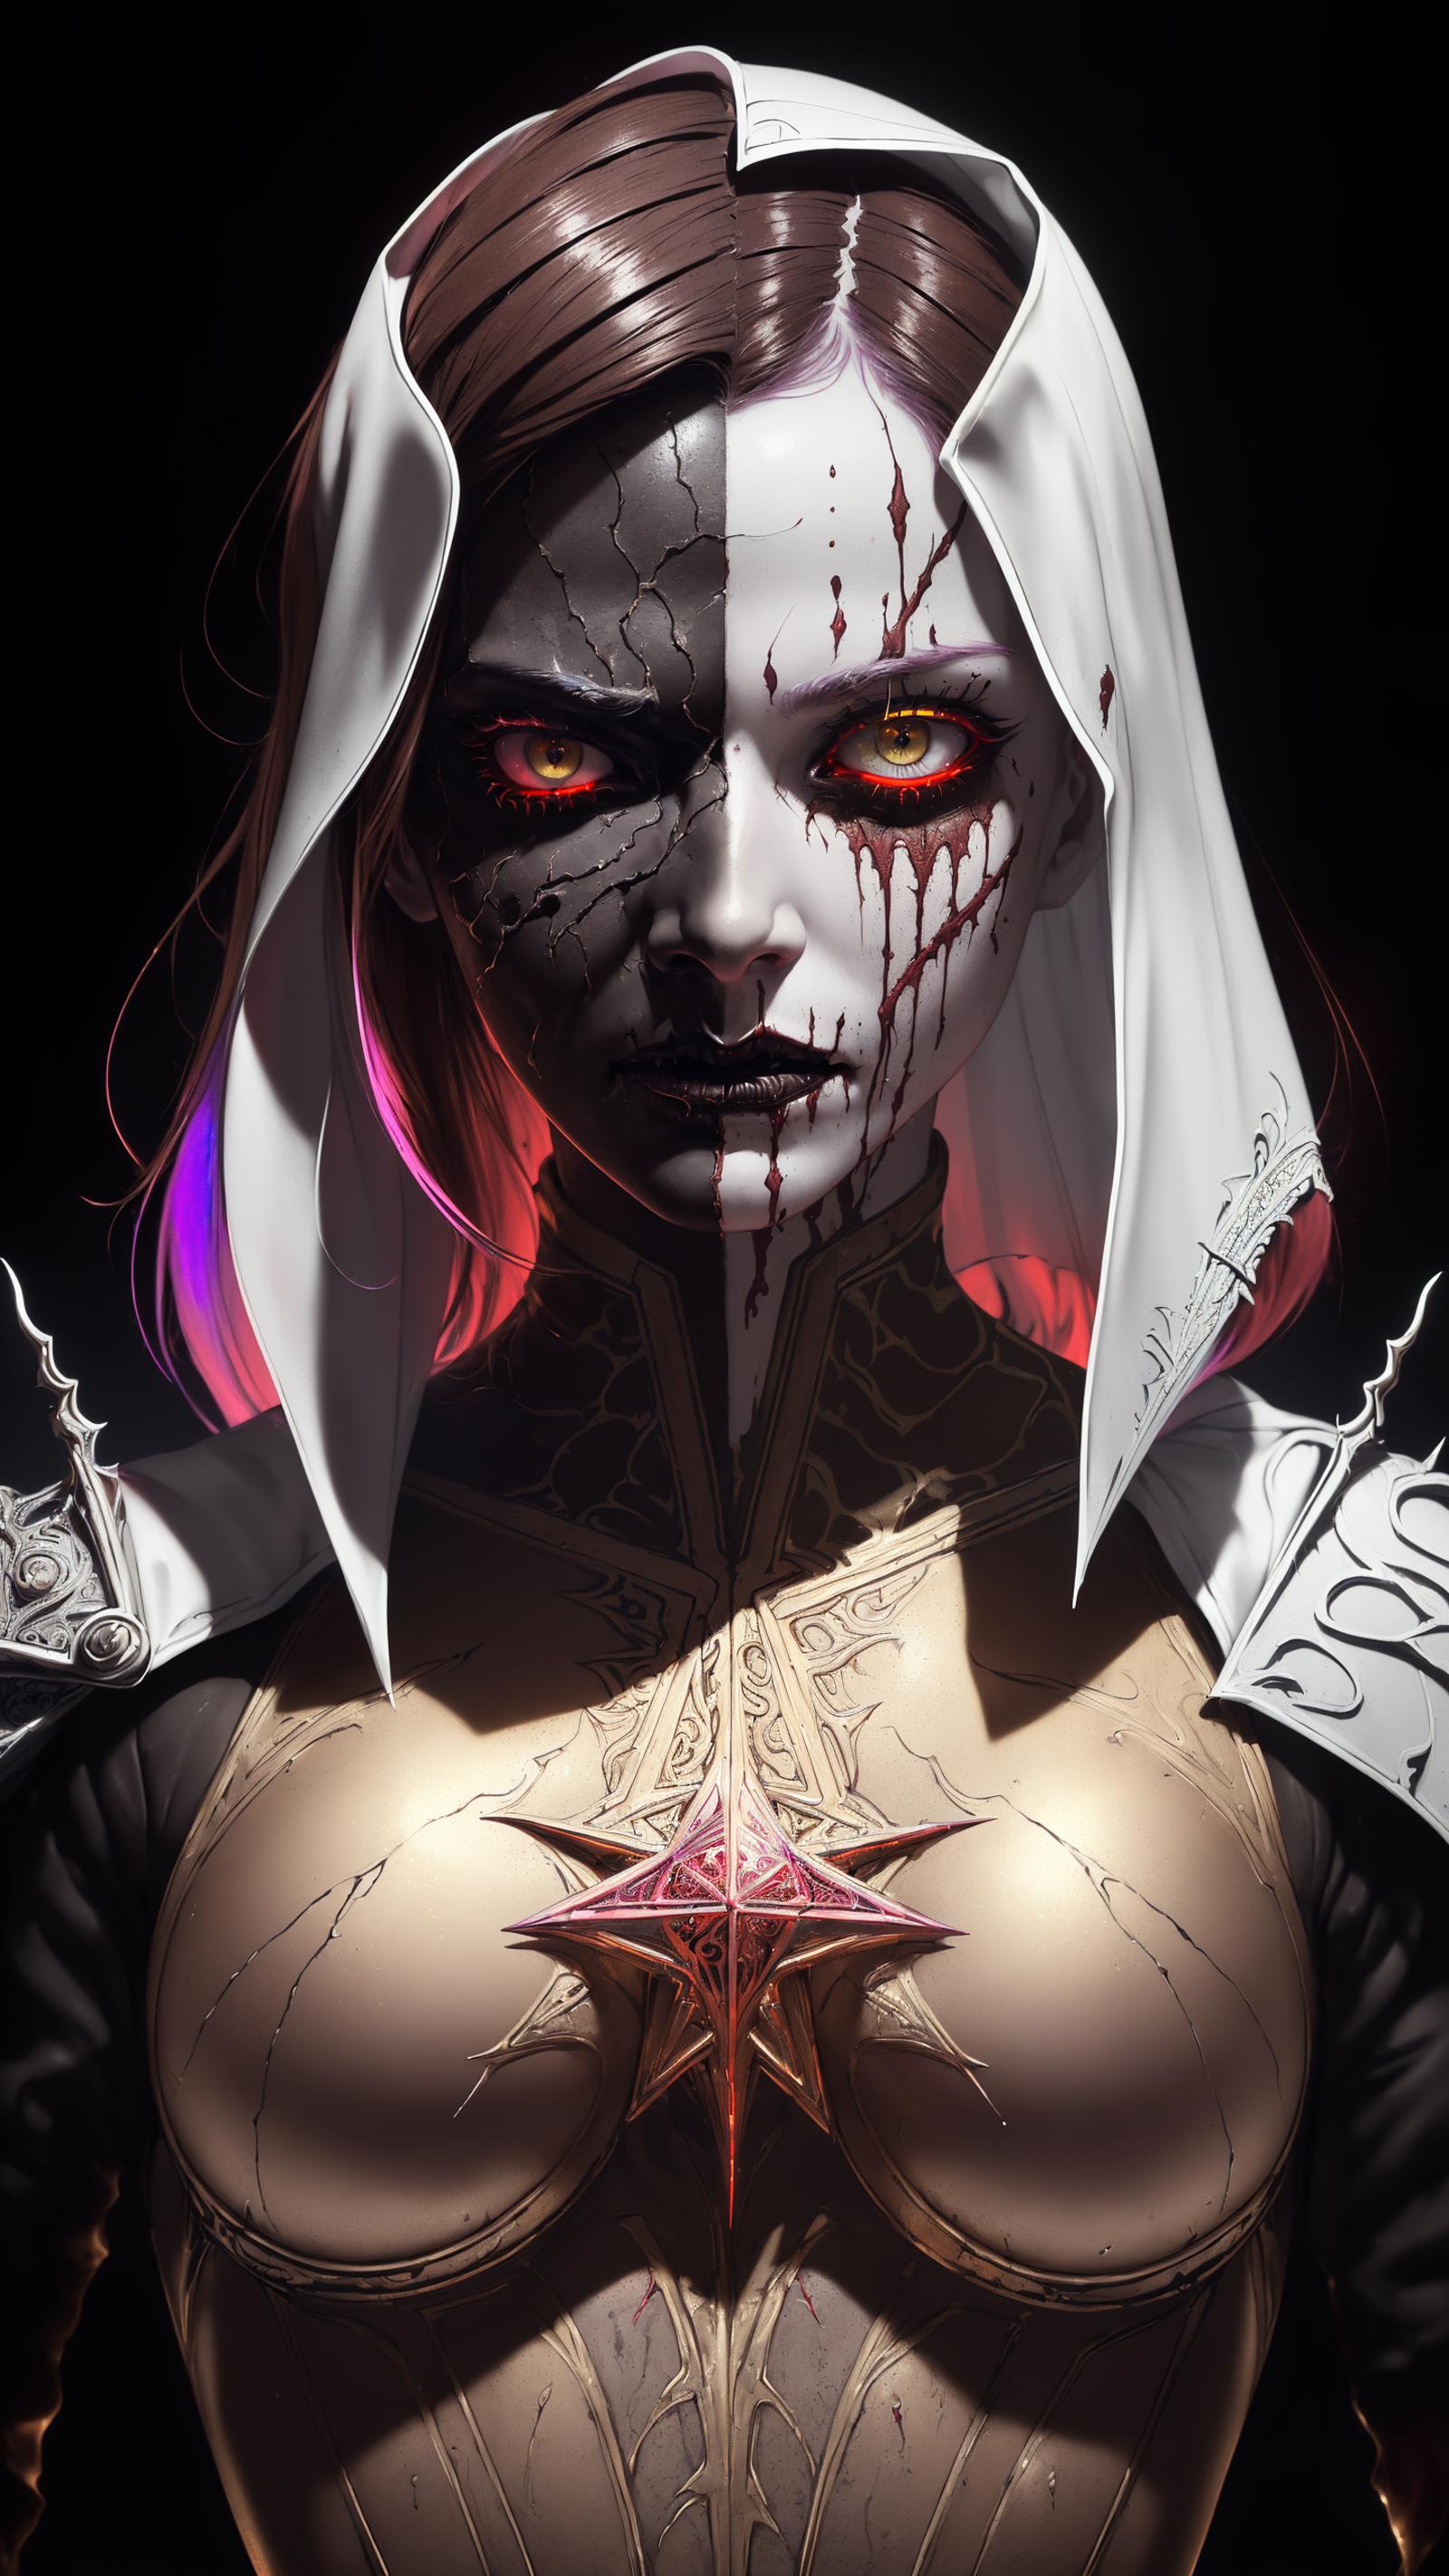 A dark and bloody image of a woman with glowing eyes and a star on her chest.